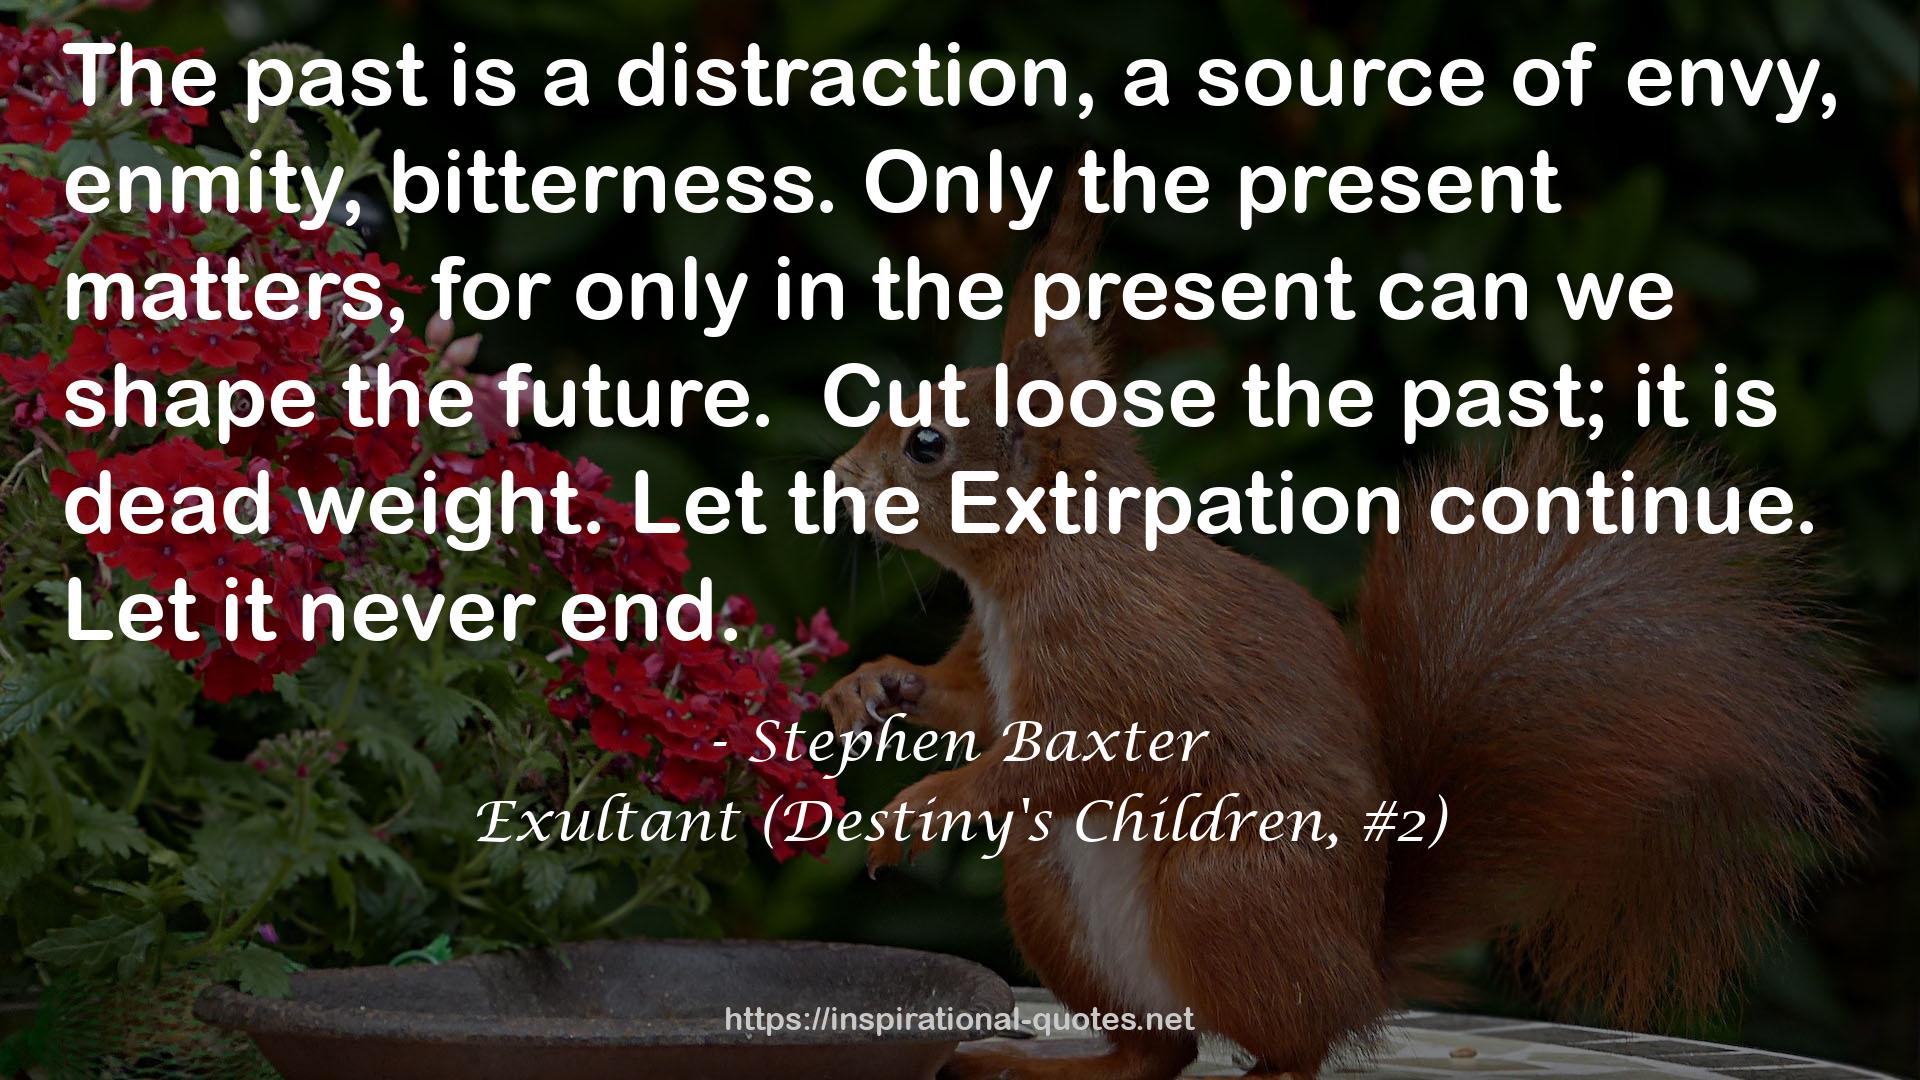 Stephen Baxter QUOTES